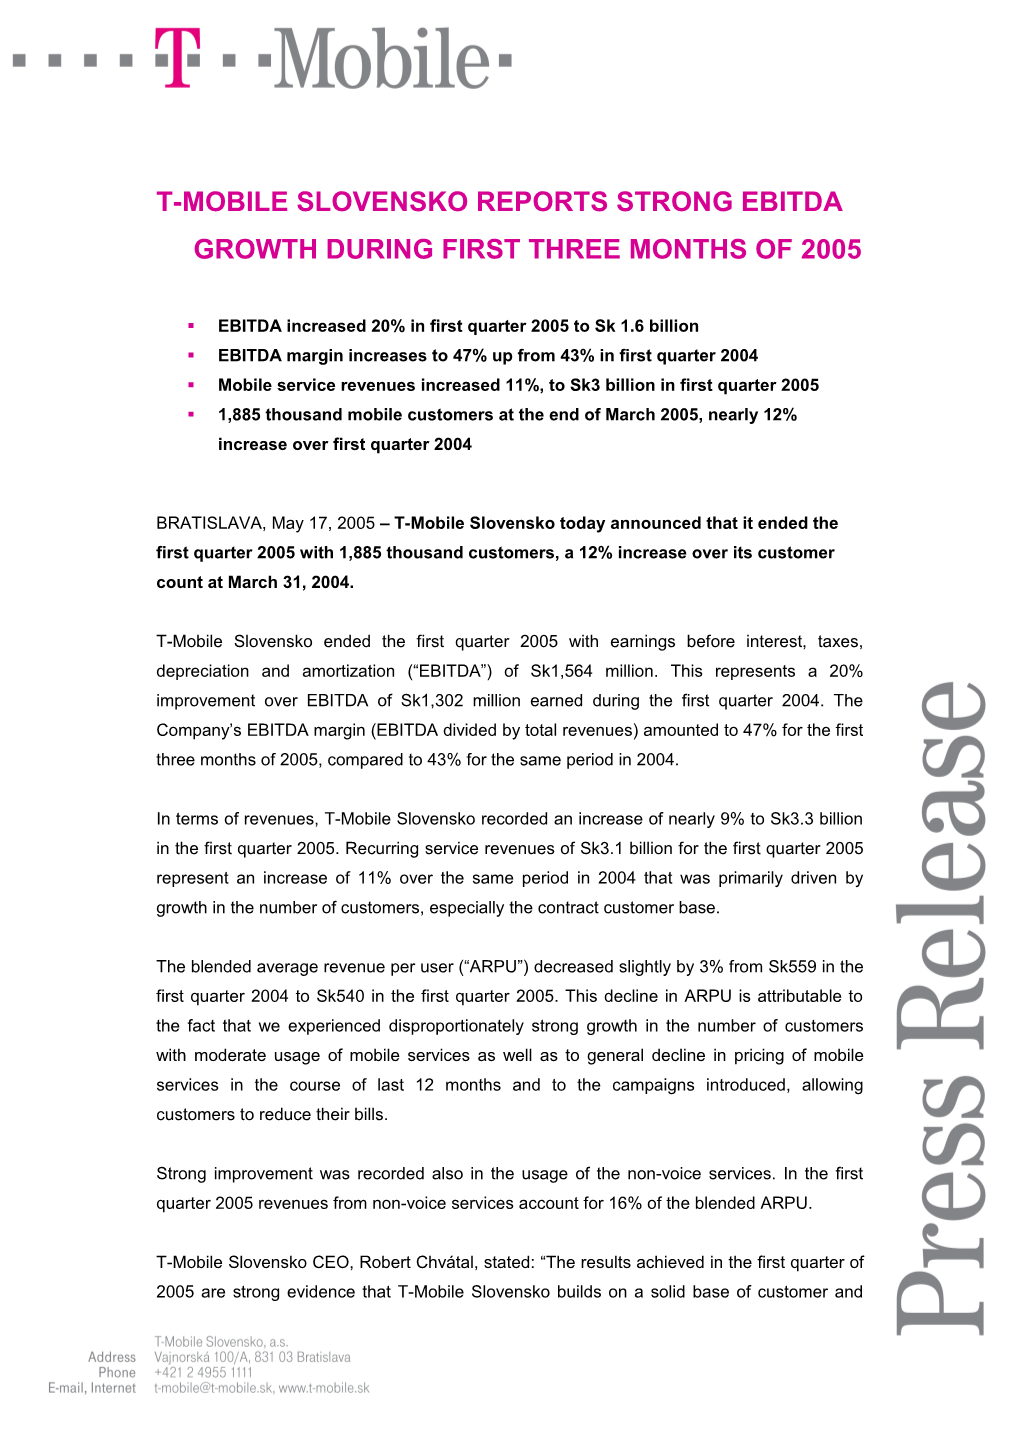 T-Mobile Slovensko Reports Strong Ebitda Growth During First Three Months of 2005